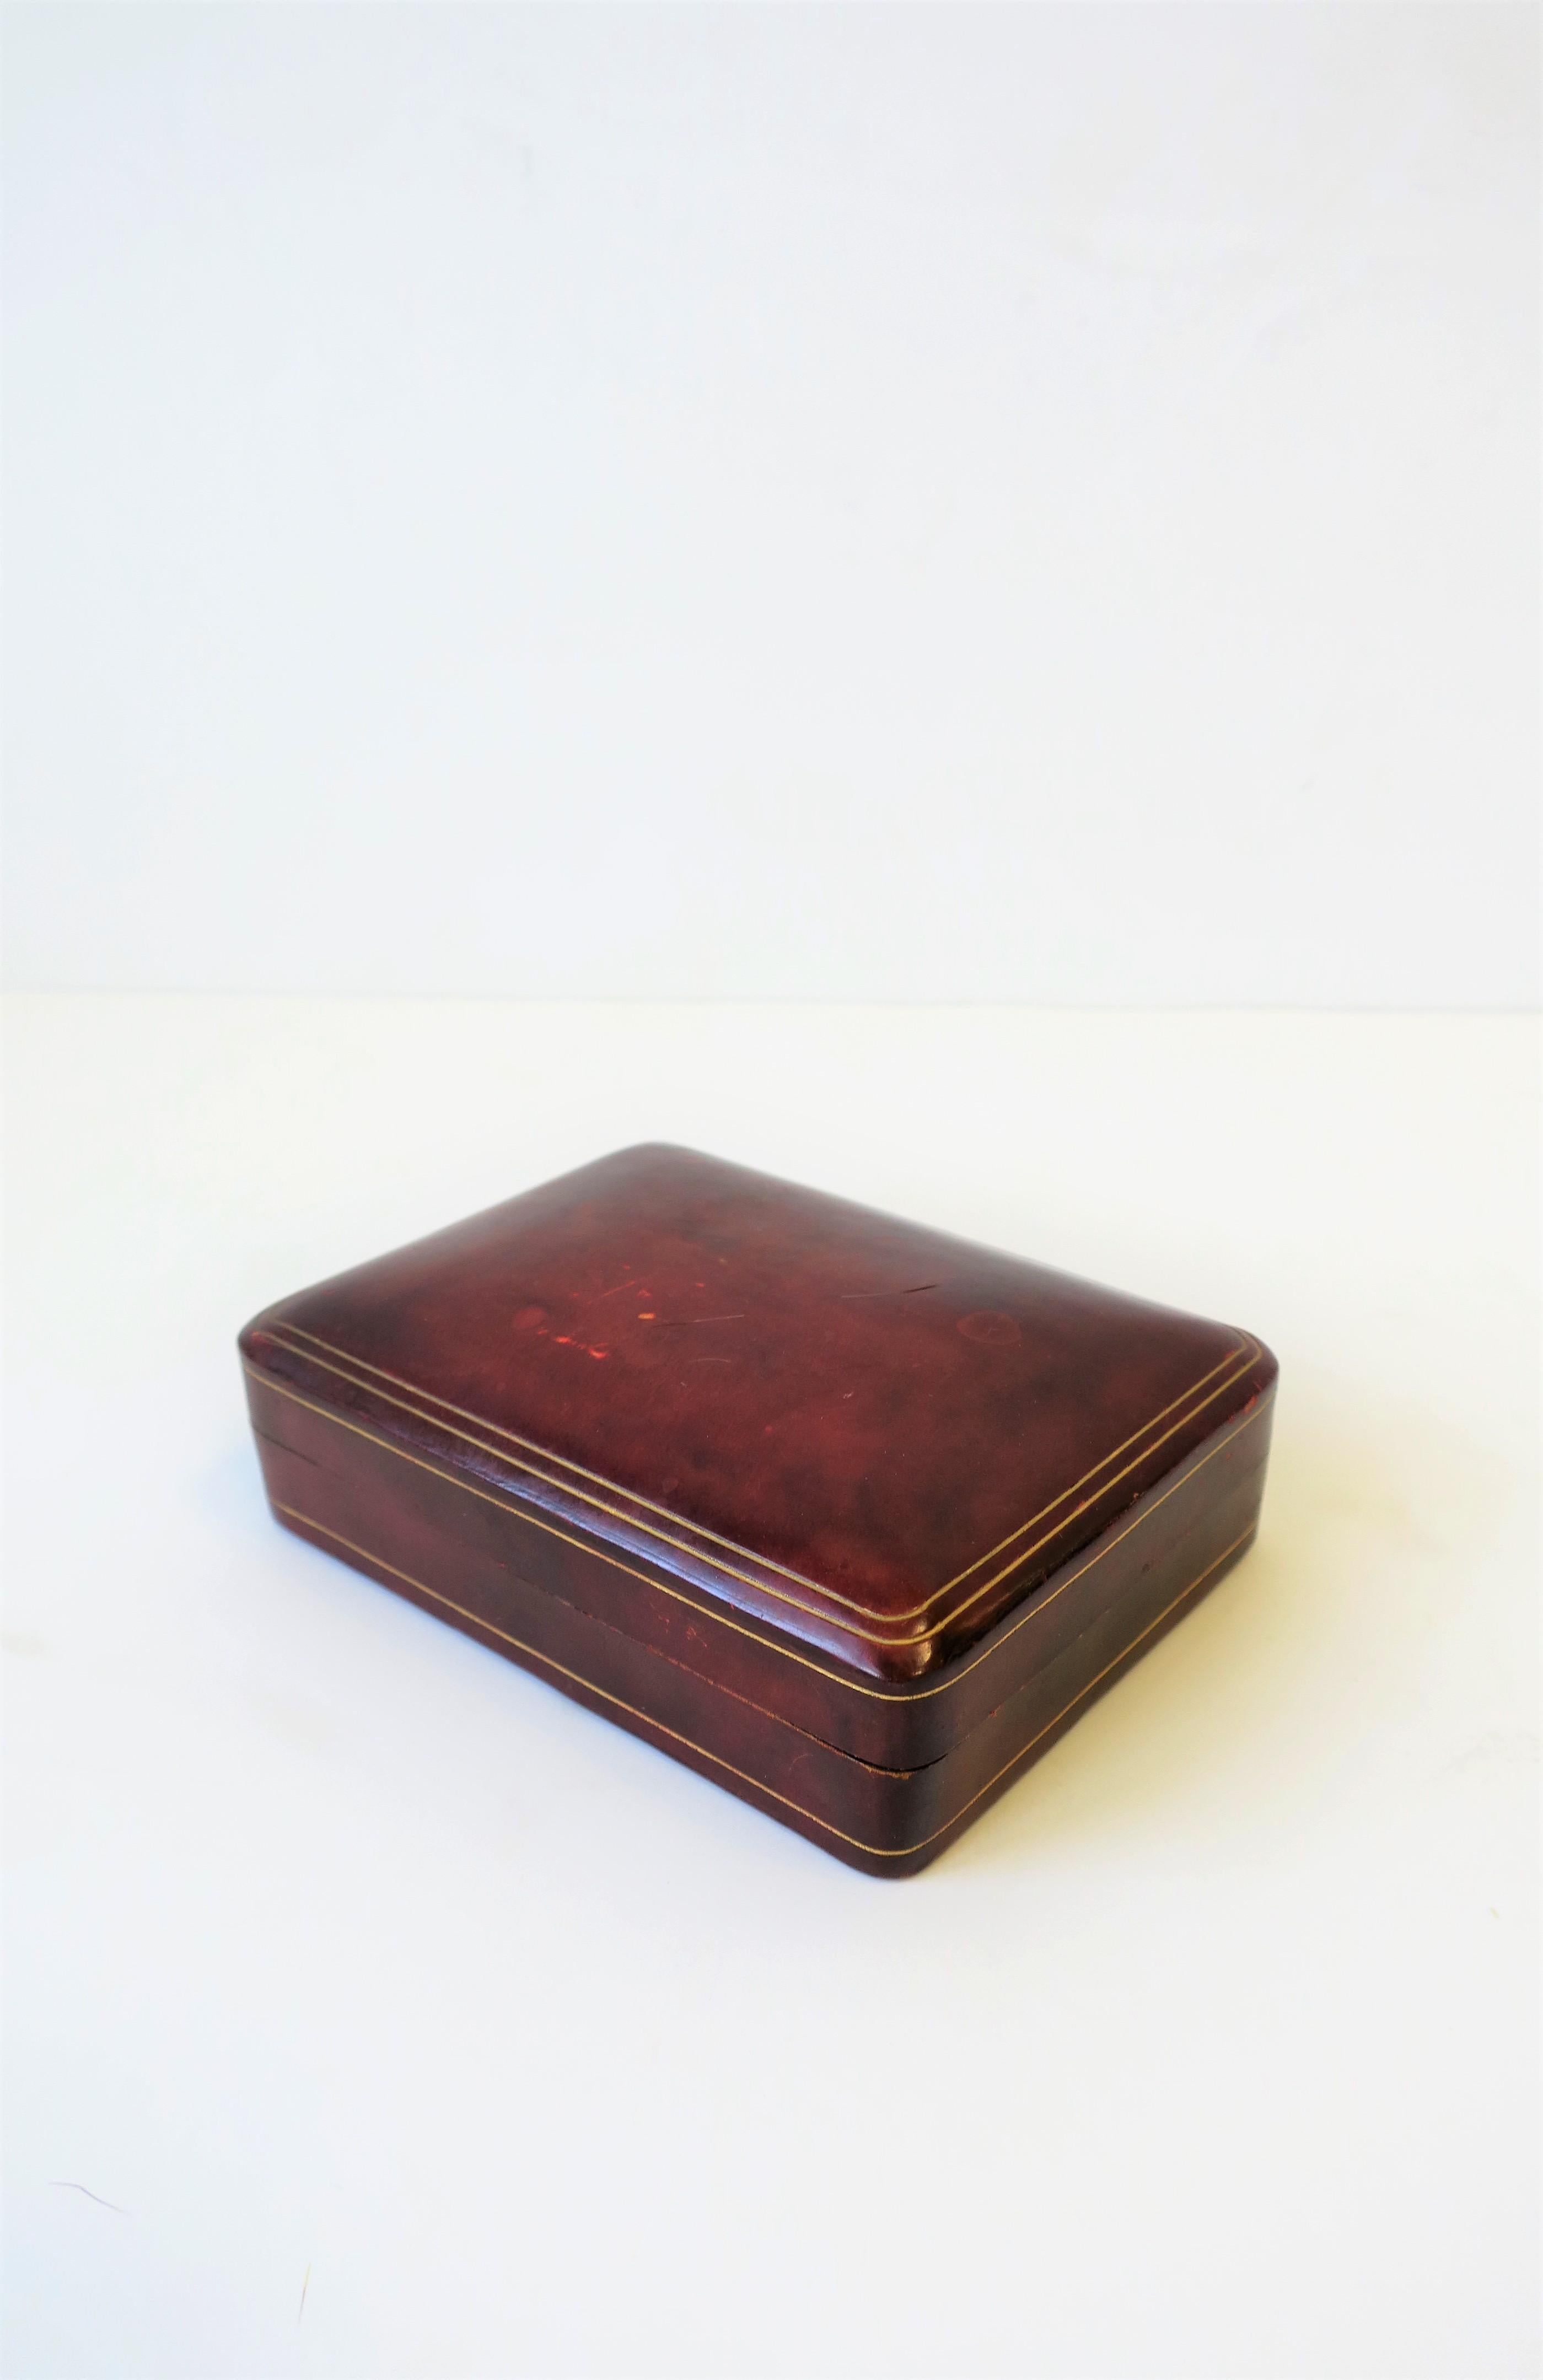 A beautiful midcentury Italian red burgundy 'ox blood' leather box with gold embossing. Marked 'MADE IN ITALY